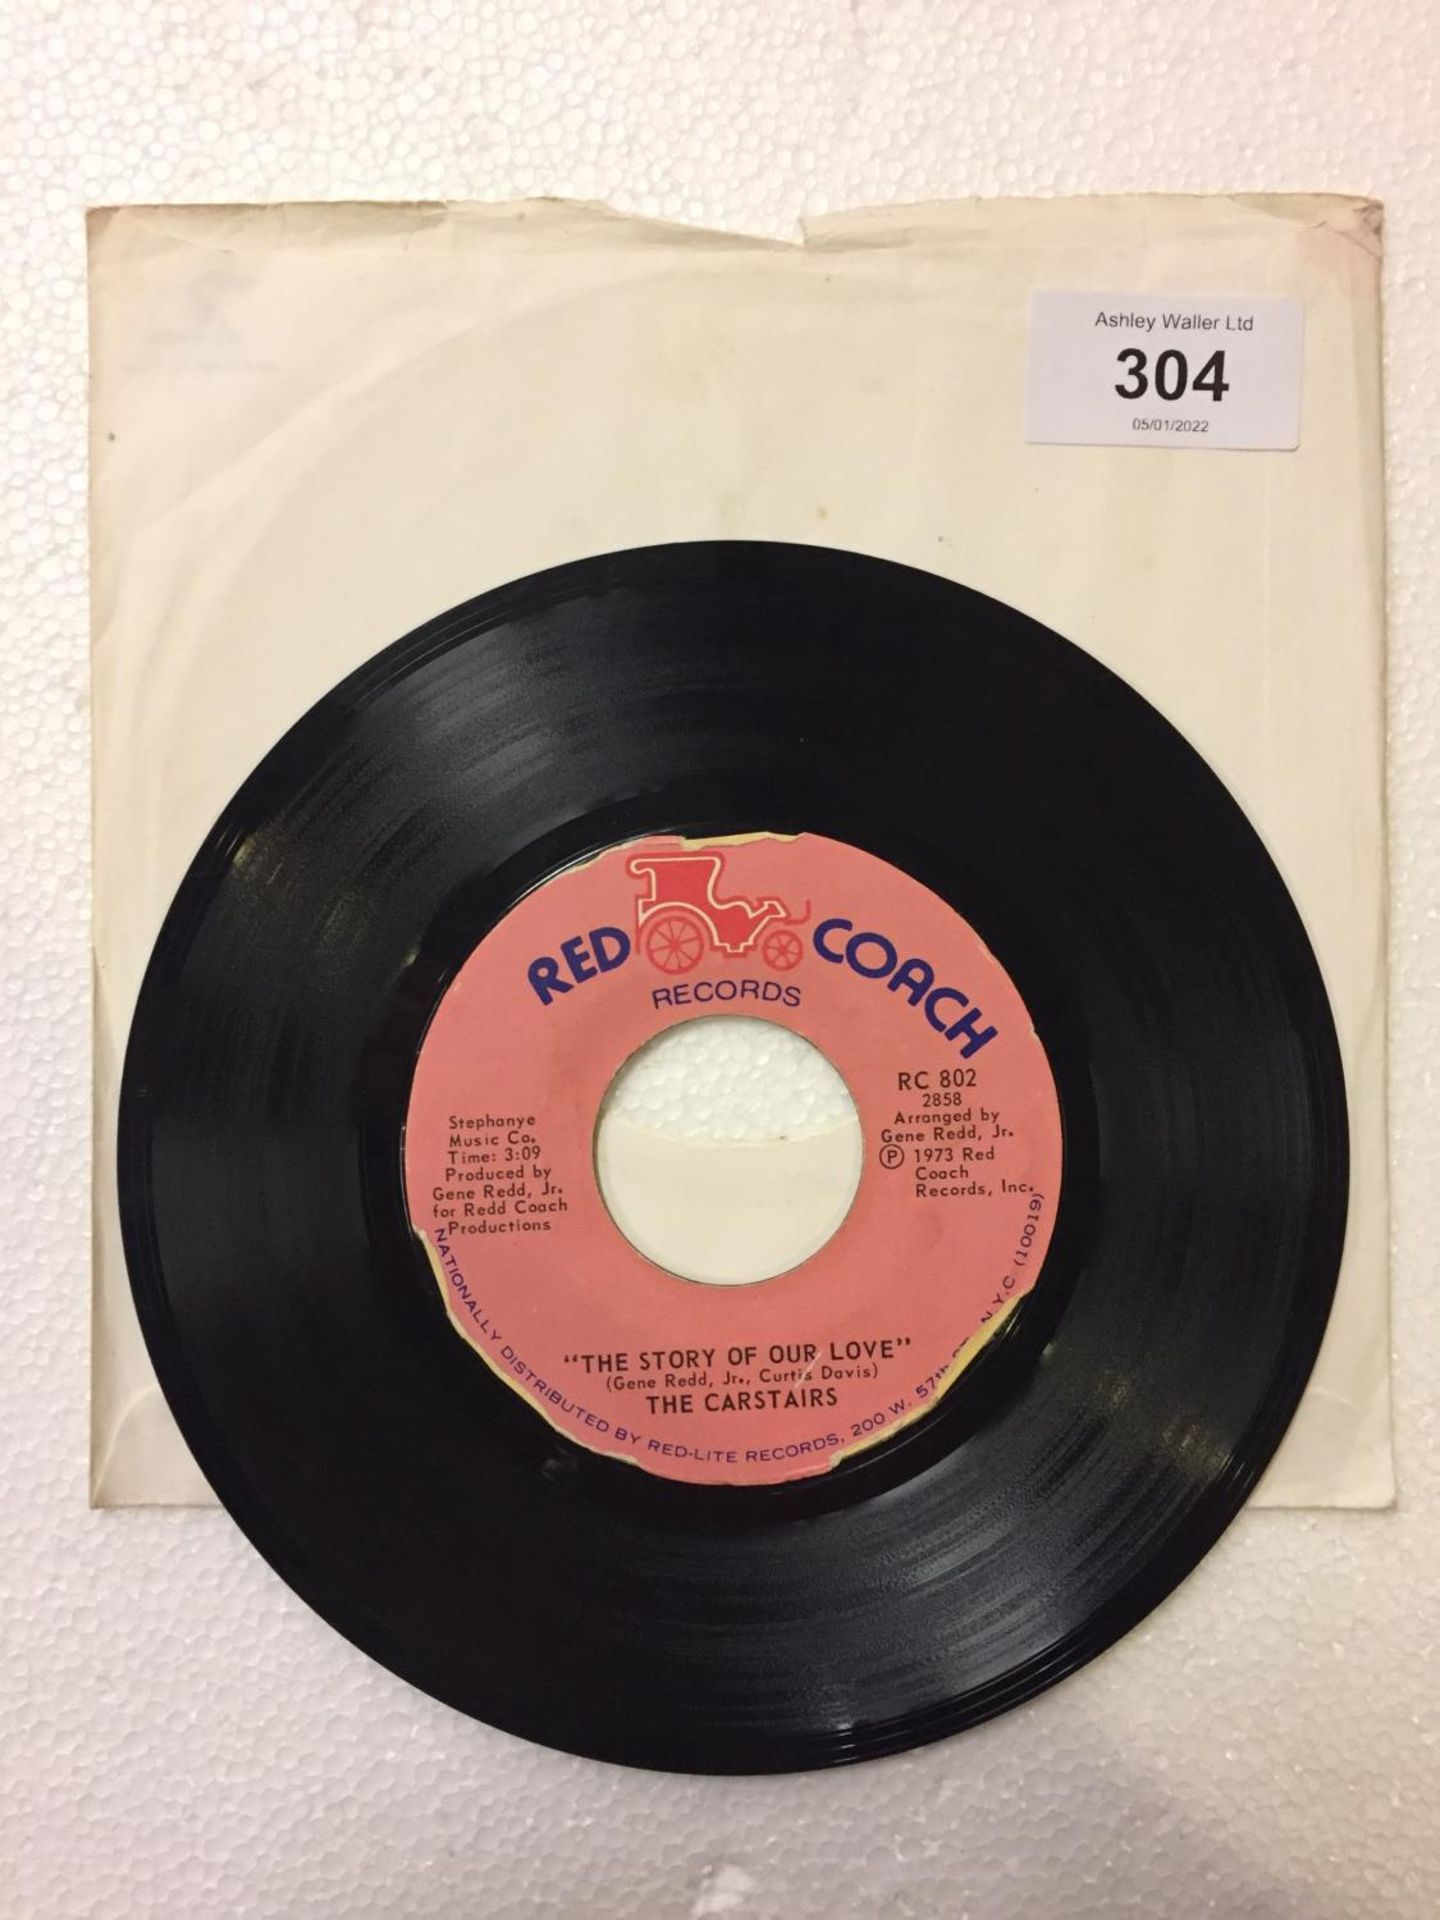 A 1973 US RELEASE 7 INCH VINYL FUNK / SOUL RECORD 'IT REALLY HURTS ME GIRL' BY THE CARSTAIRS. LABEL: - Image 2 of 2